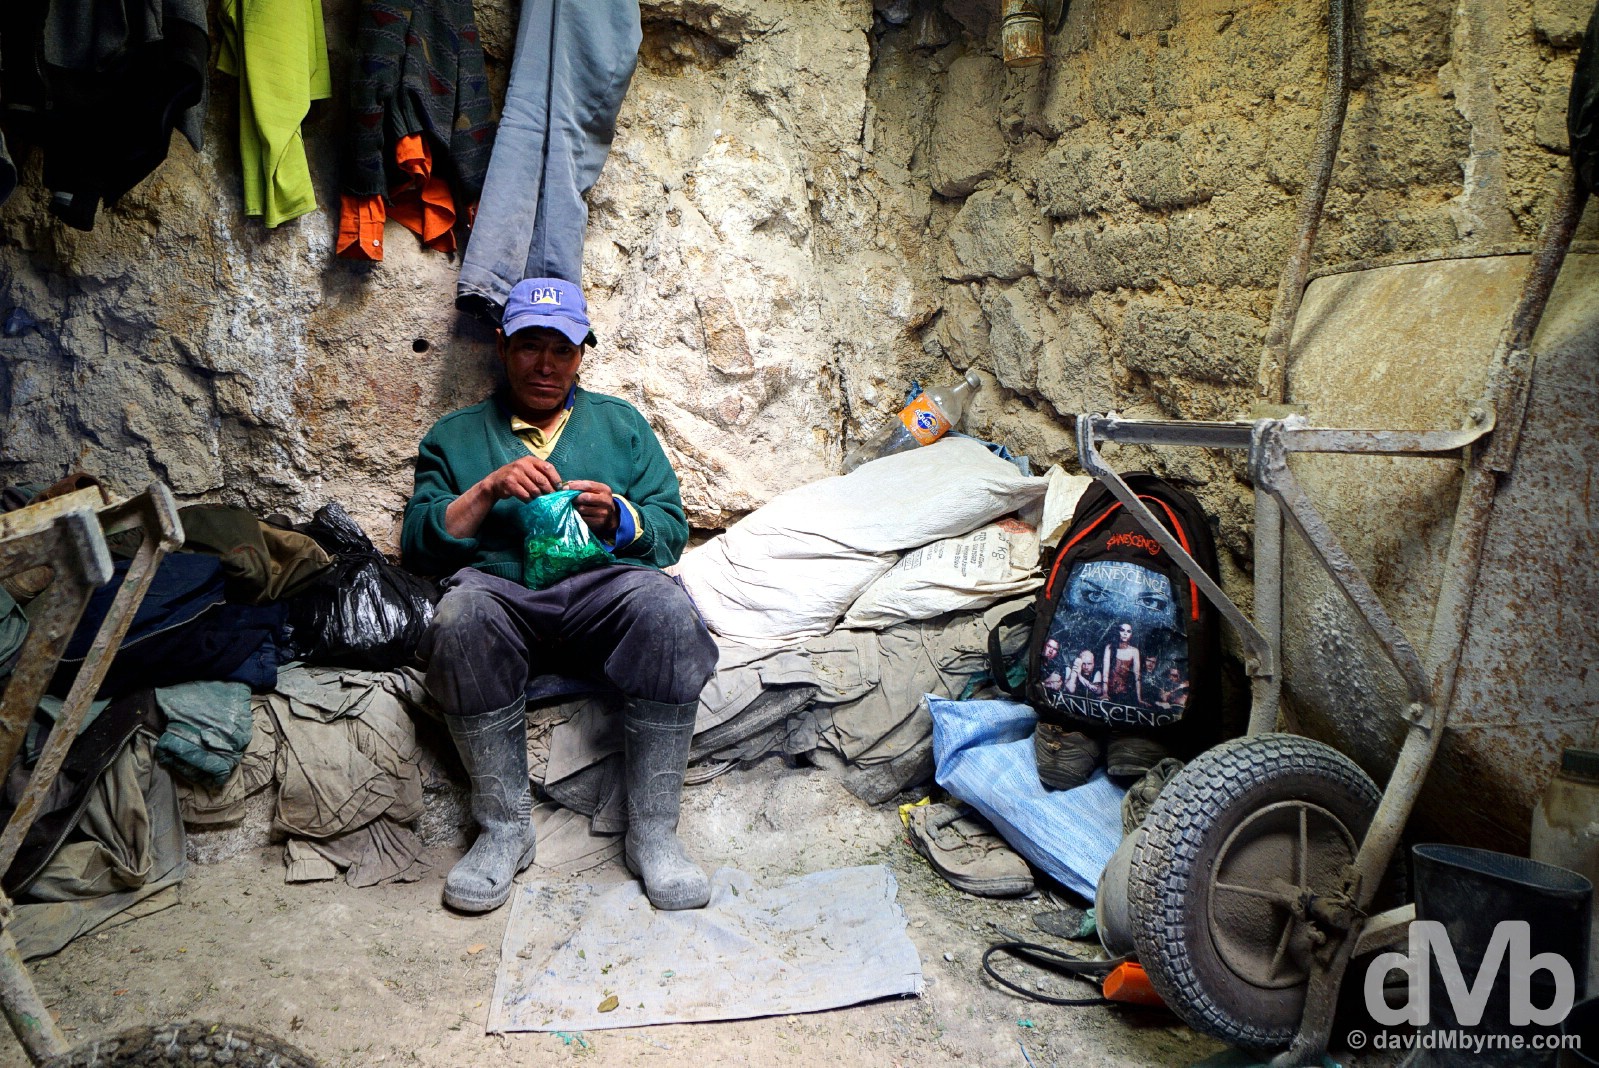 A miner during a break from work in the Cerro Rico Mines, Potosi, Bolivia. September 1, 2015.